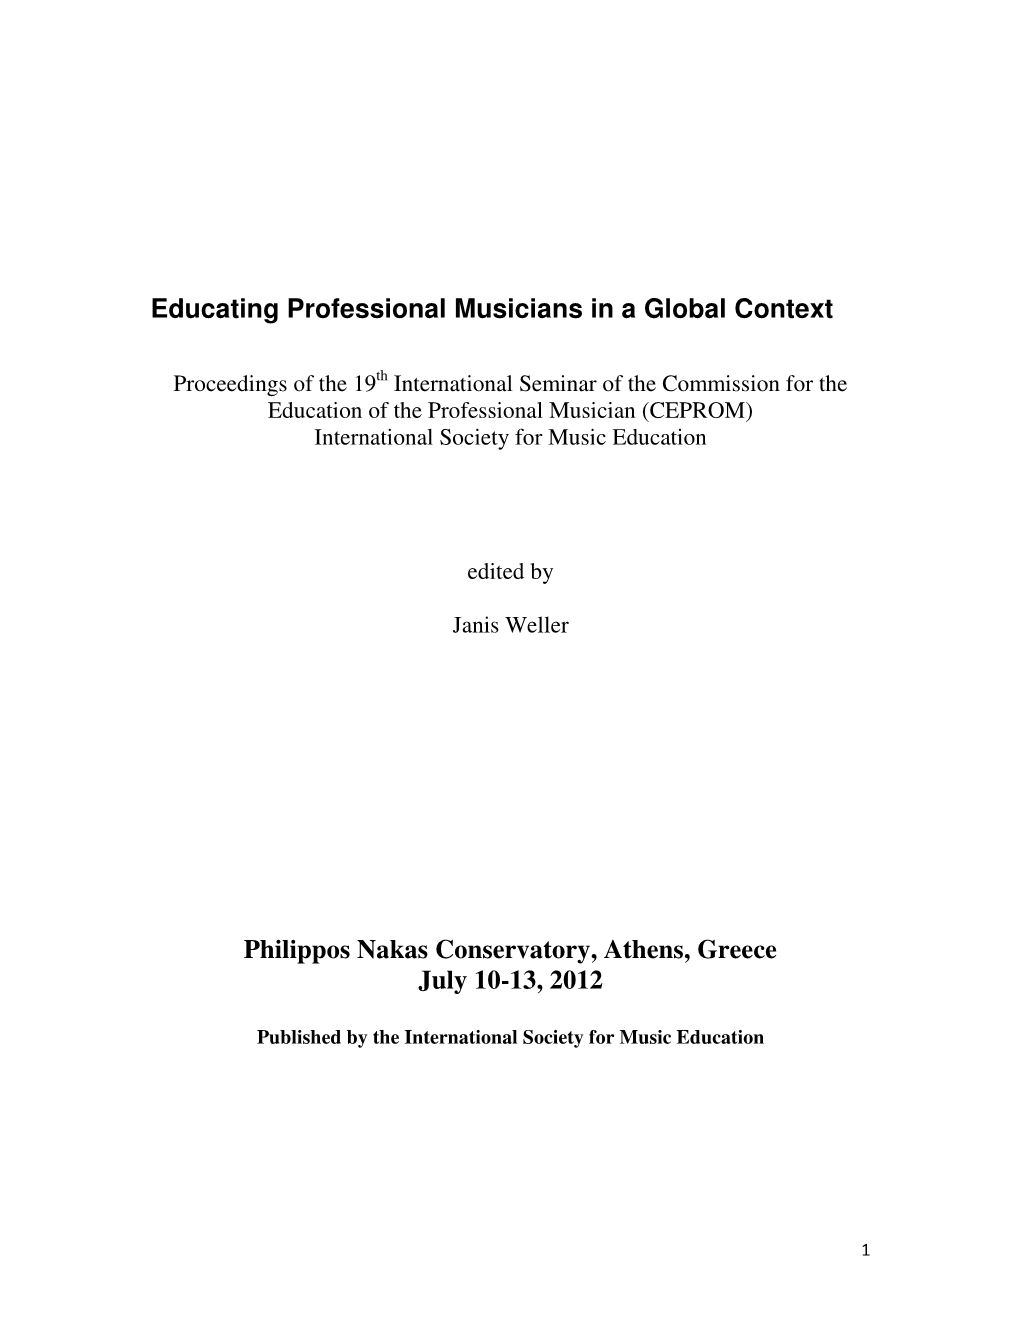 Educating Professional Musicians in a Global Context Philippos Nakas